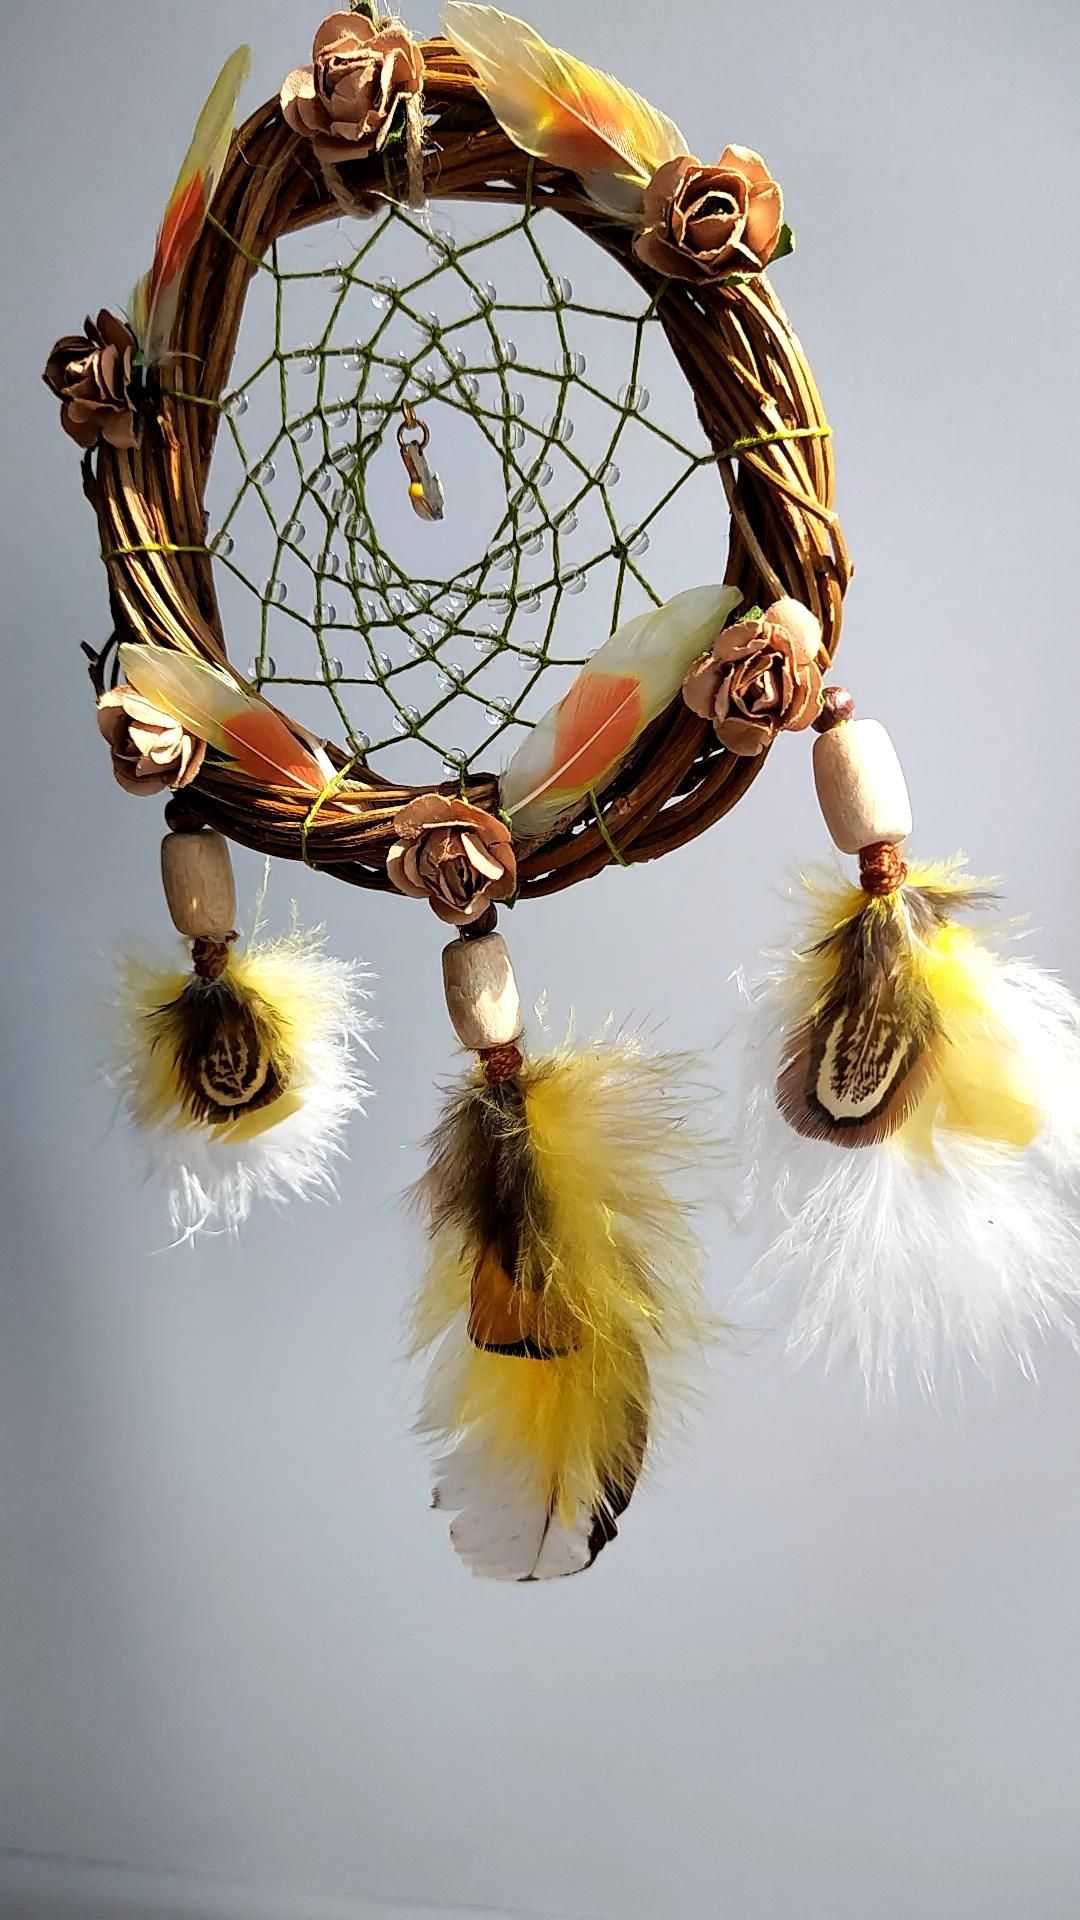 Small Yellow Dreamcatcher, Wall Hanging ,Natural Home Decor,Native american dreamcatcher - Small Yellow Dreamcatcher, Wall Hanging ,Natural Home Decor,Native american dreamcatcher -   19 diy Dream Catcher for men ideas